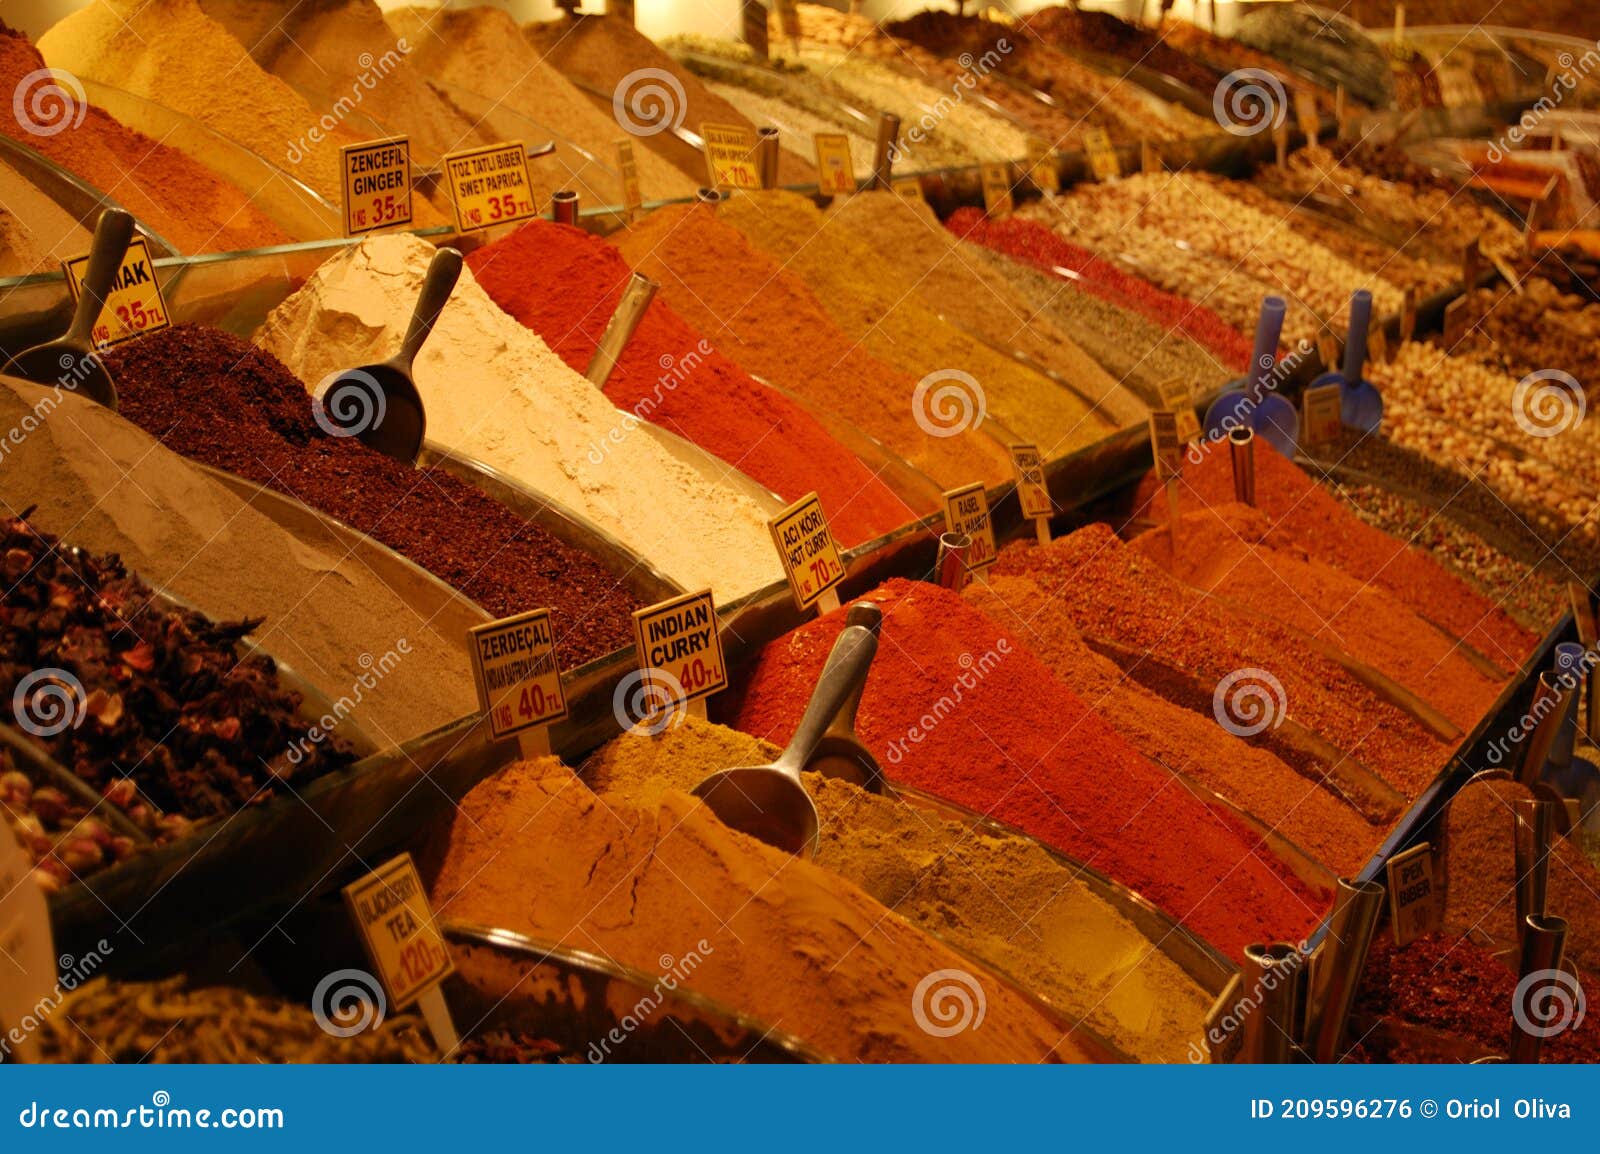 view of the shops of different spices in the grand bazaar, in istanbul turkey